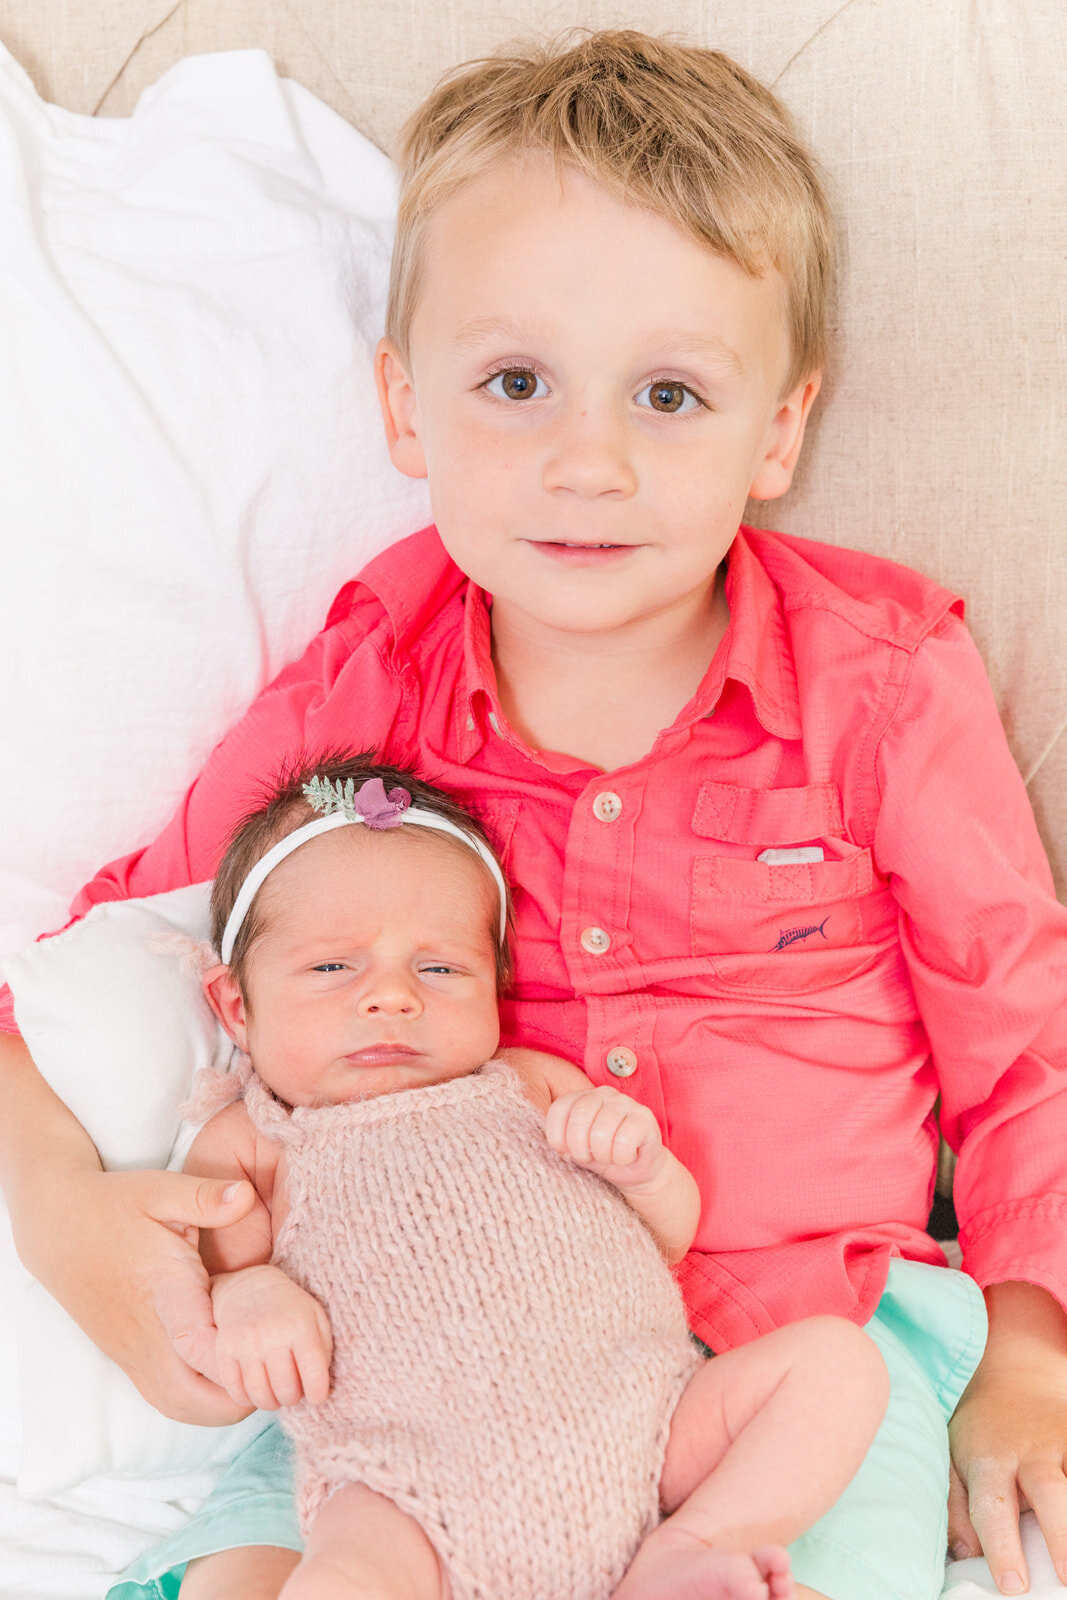 todder sibling sitting and holding newborn baby